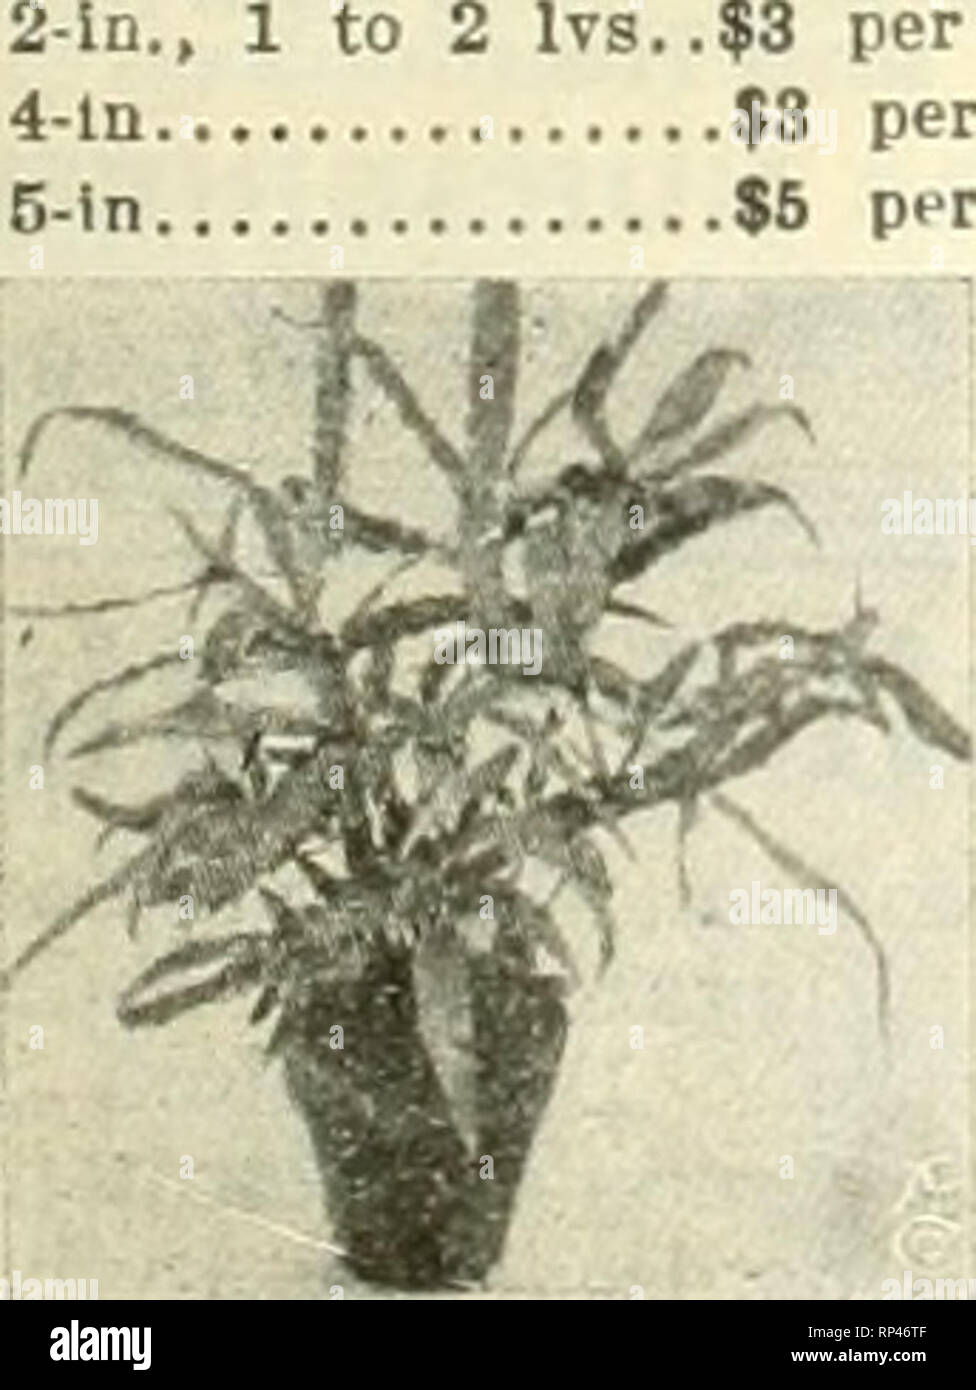 . The American florist : a weekly journal for the trade. Floriculture; Florists. Bedding Plants ACHRYANTHES, Rooted Cuttings. Per 1.000 Metallica % 6.00 P. de Bailey 10.00 Lindenii 6.00 Warscewiezii 6.00 Achryanthes, P. de Bailey 2-ln., $2.50 per 100. Ageratum, Stella Gurney and Princess Pauline, 2-in., $2.00 per 100. Alternanthera, Rooted Cuttings, Aurea Nana, Brilliaiittsslma, Paronychoides Major, $6.00 per 1,000. COLEUS, 2-iiich. Per 100 Pflster, red and yellow $2.00 Befkwitb's Gem 2.00 Golden Bedder 2.00 Verschaffeltii 2.00 Geraniums, S. A. Nutt, Rose, 2-in,, $2.00 per 100. Gnaphalium Lana Stock Photo